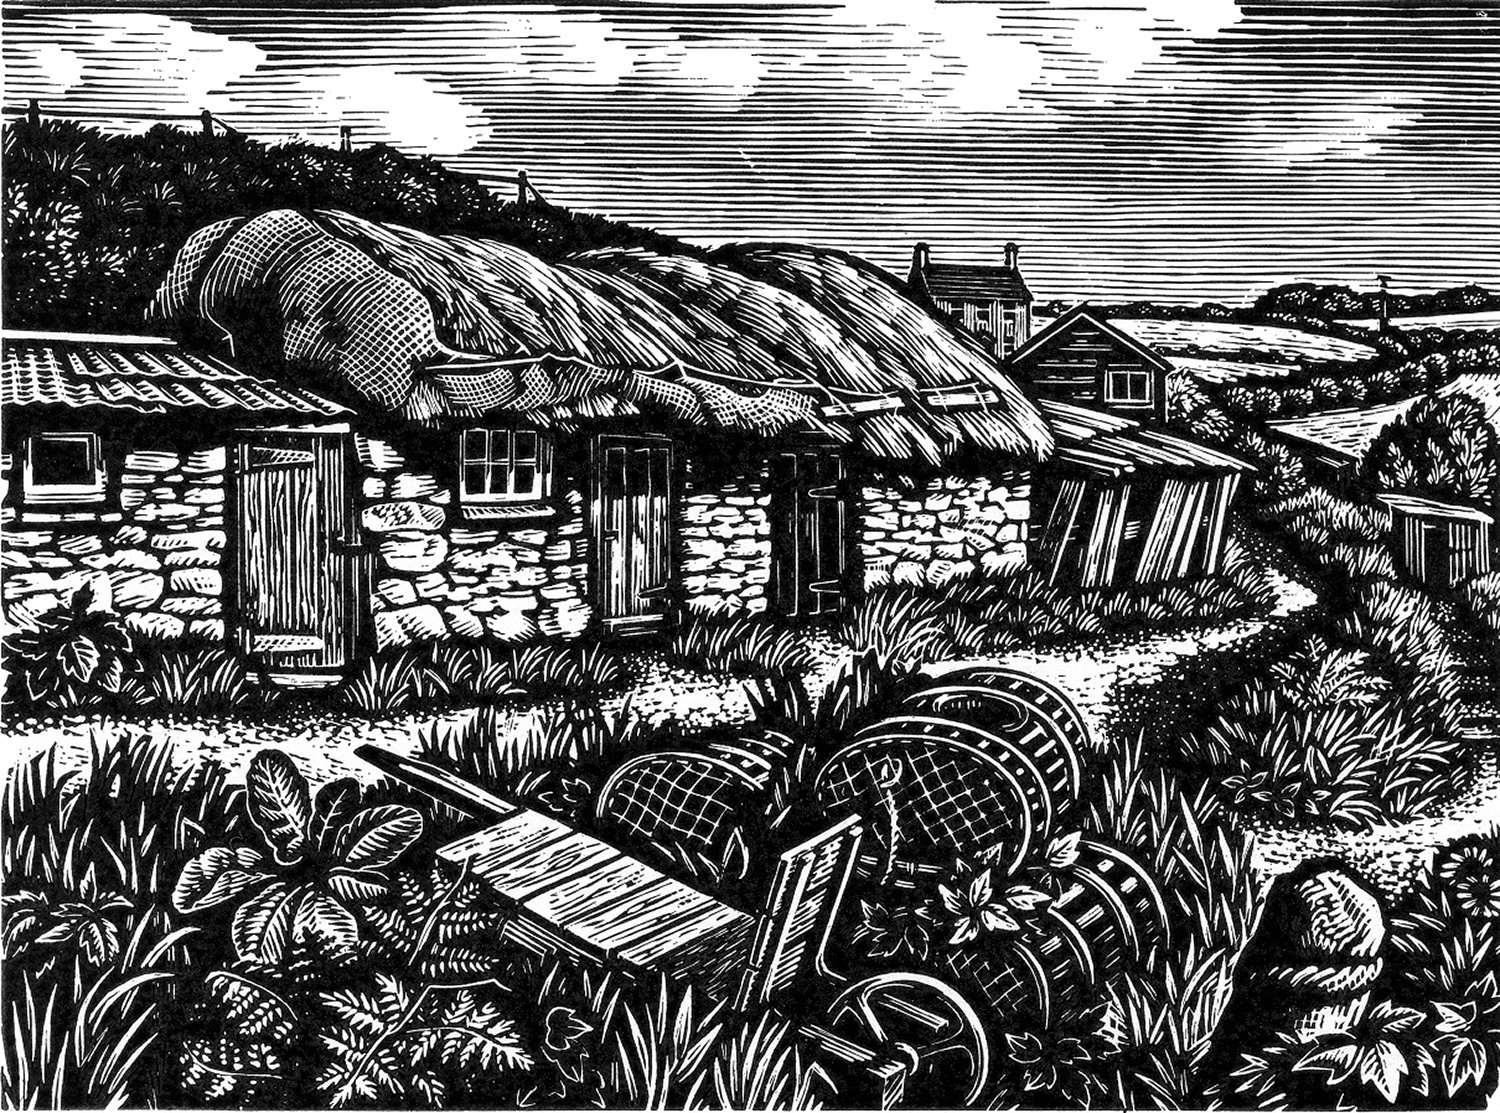 Fishing Huts at Prussia Cove by Howard Phipps